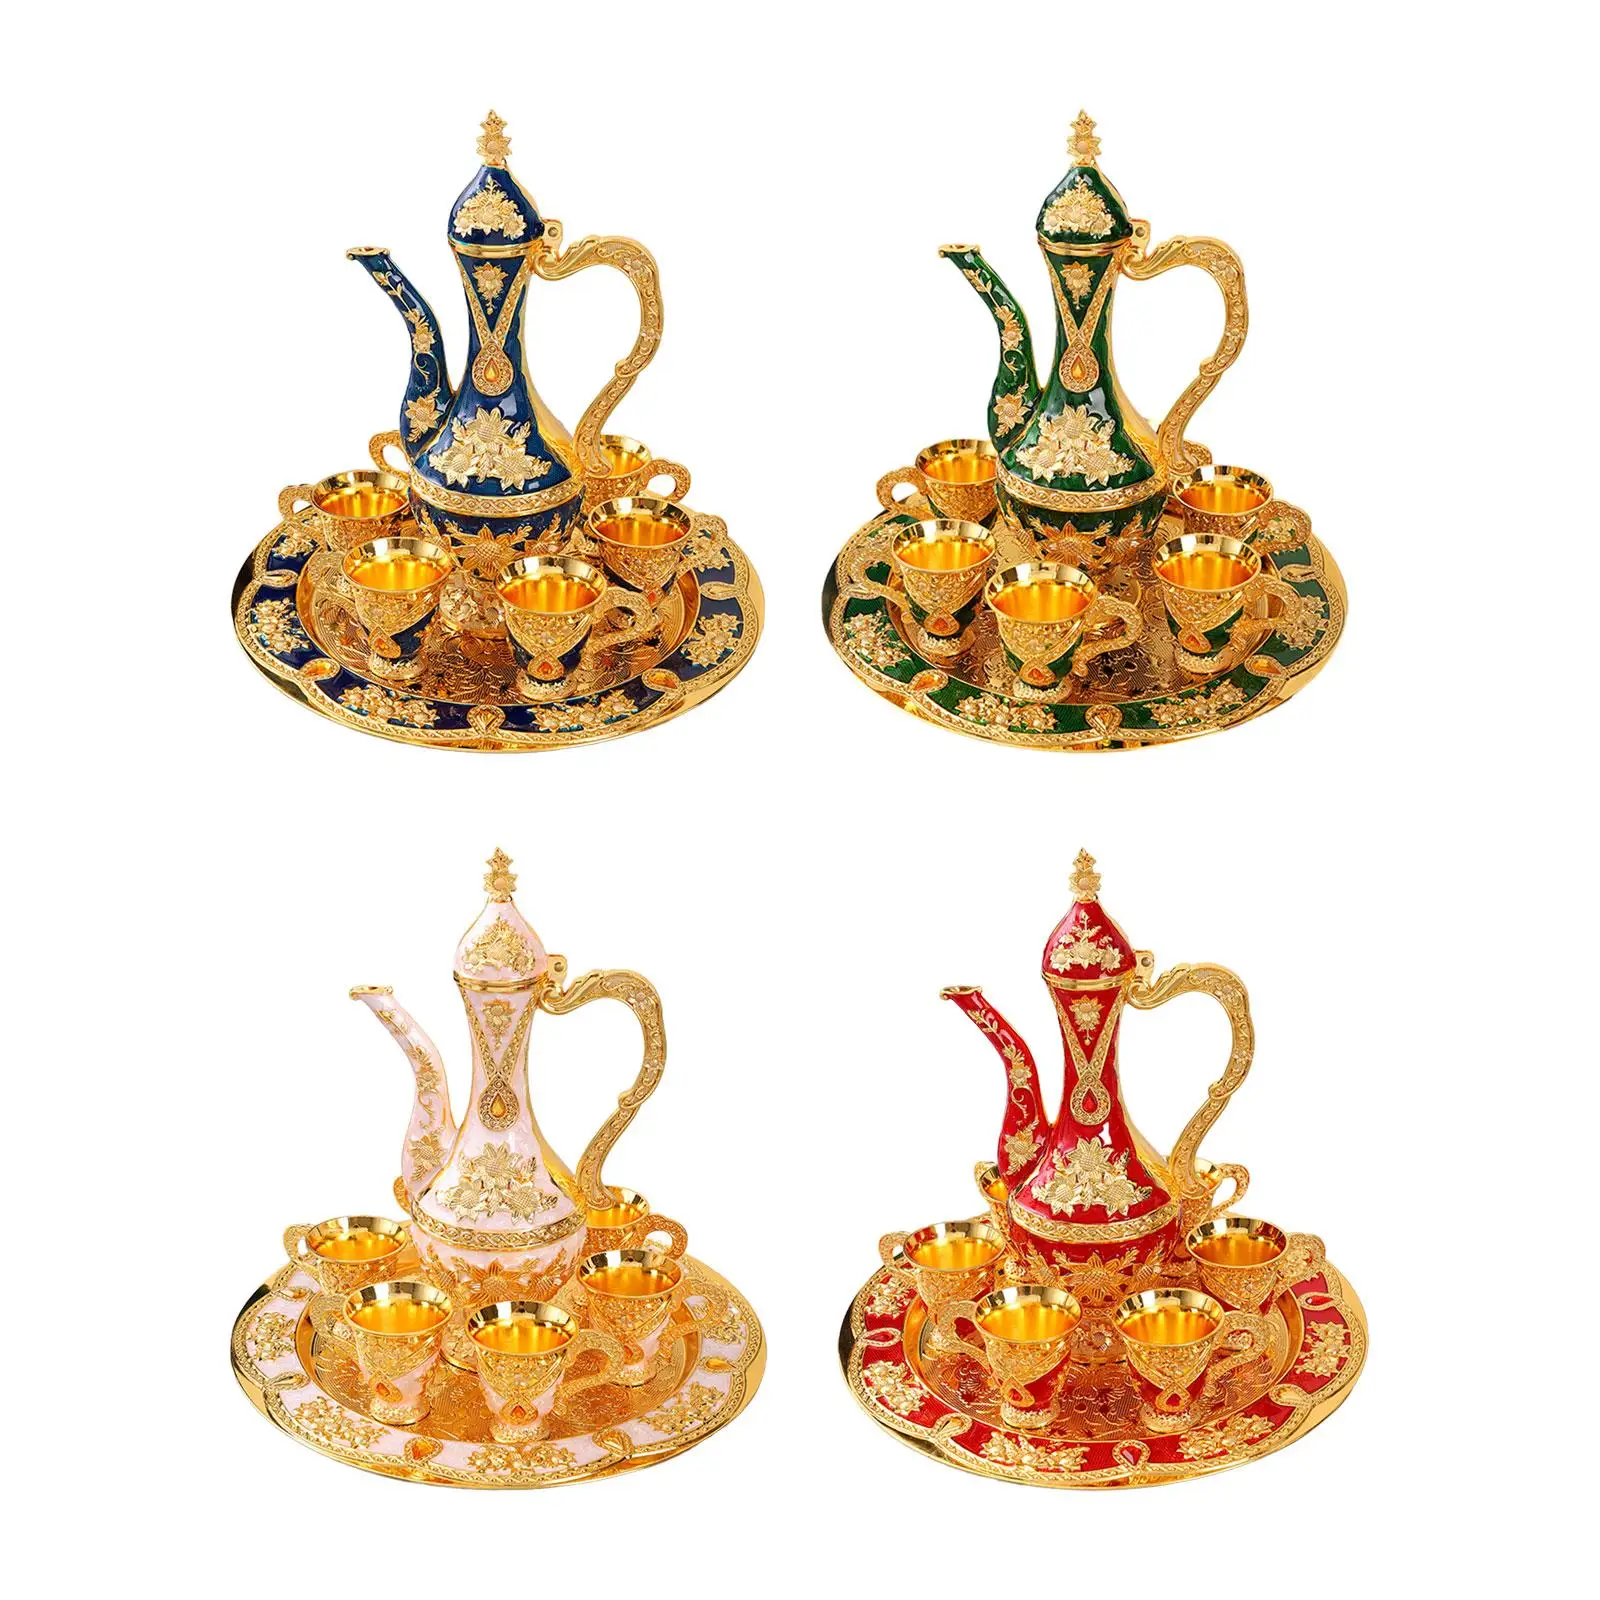 Turkish Coffee Set Home Decor Turkish Coffee Cups Set Coffee Pot Serving Set for Living Room Dining Room Bedroom Home Decoration